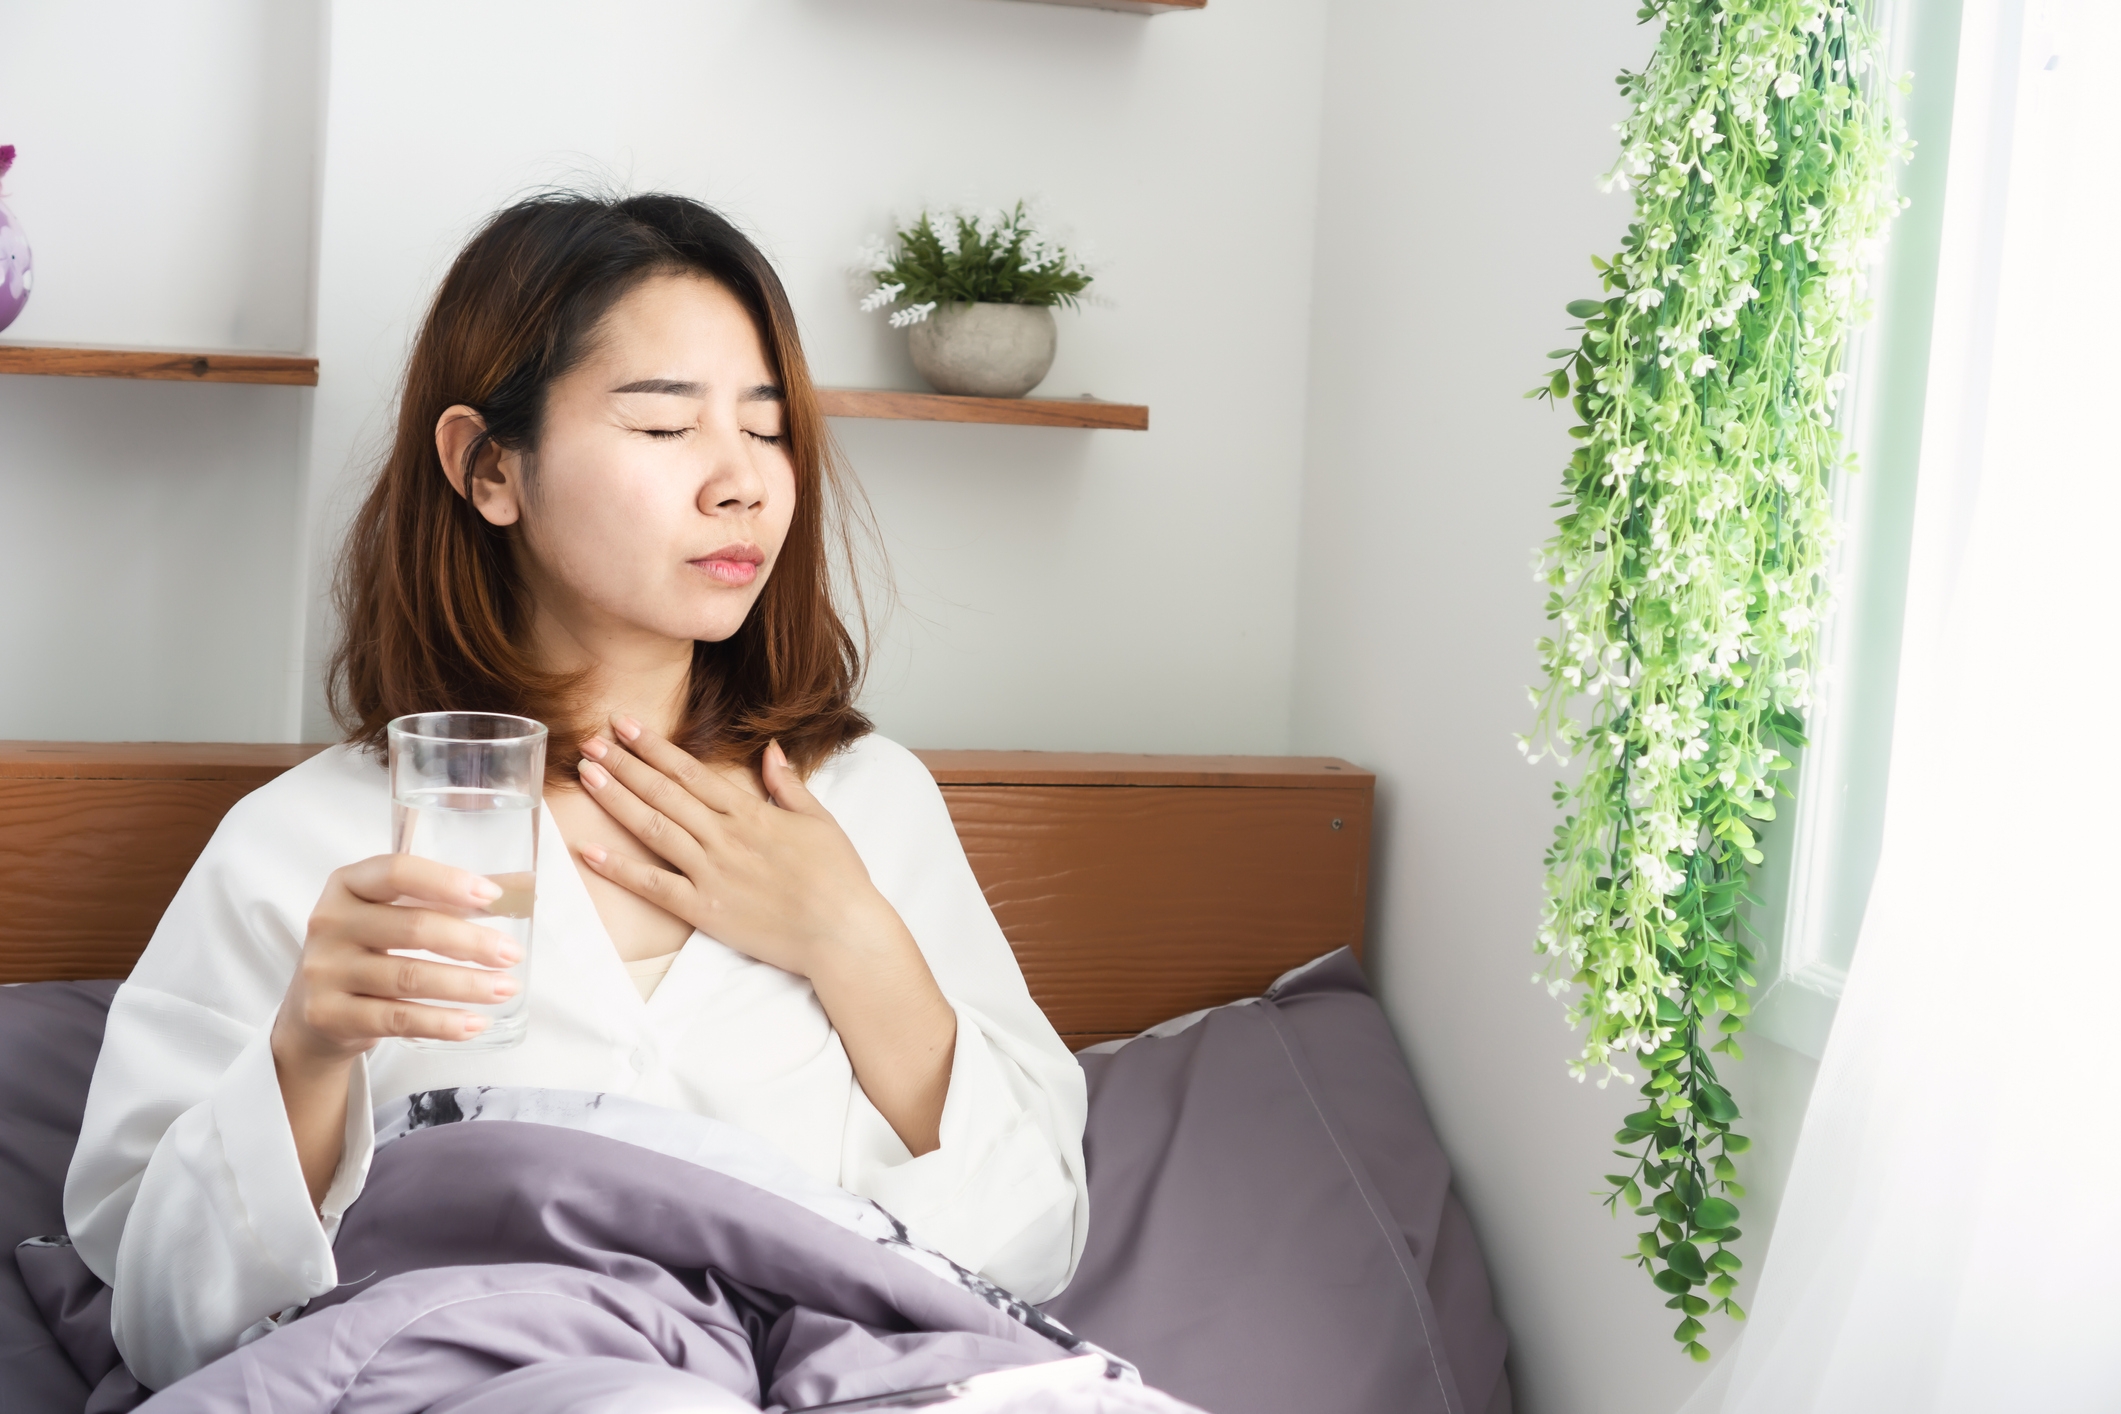 Woman with sore throat symptoms holding a glass of water